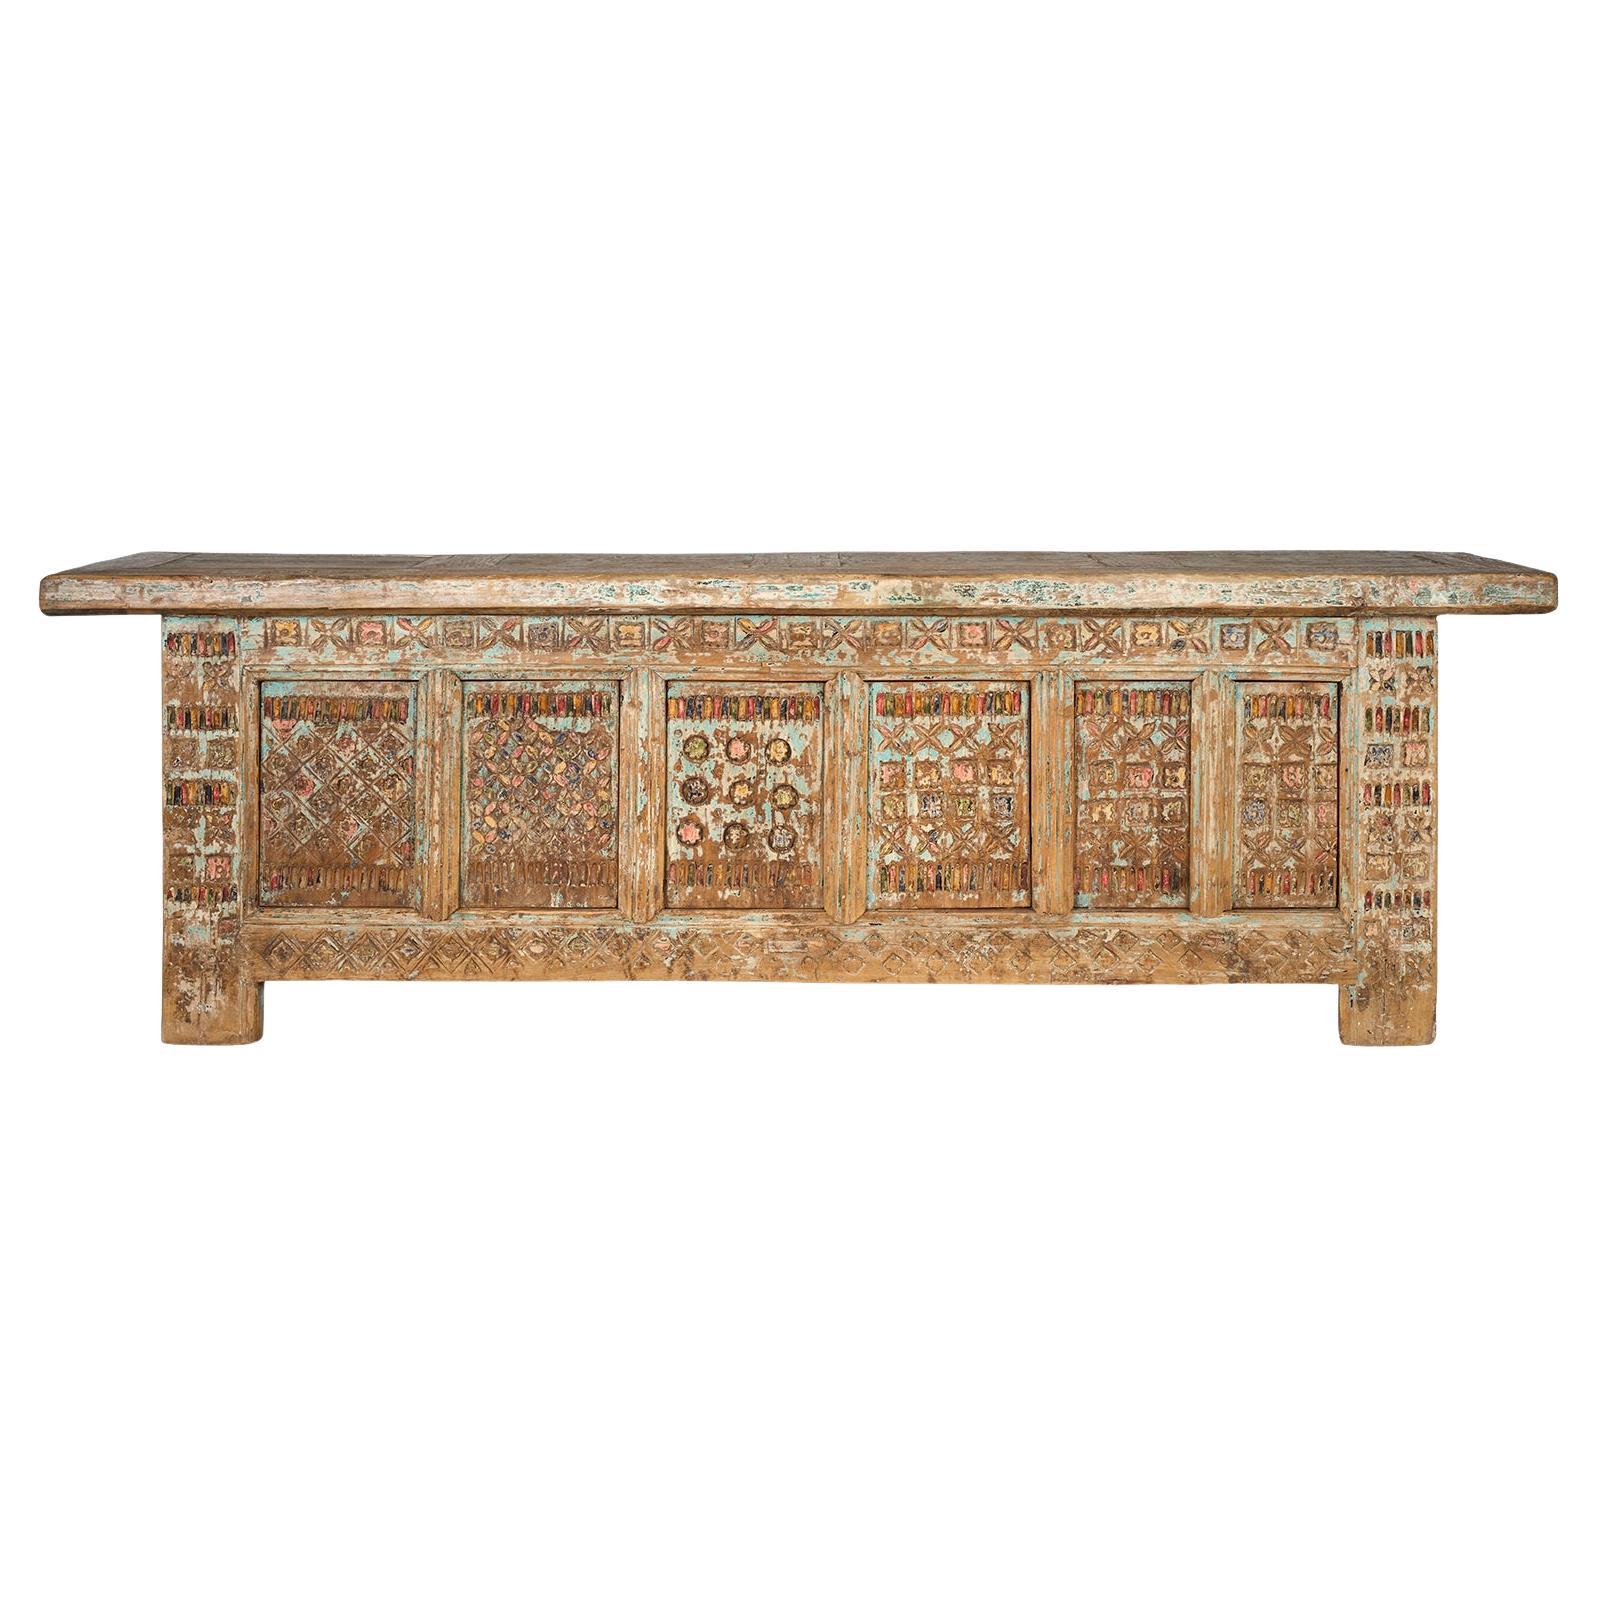 Polychrome South Asian Low Cabinet